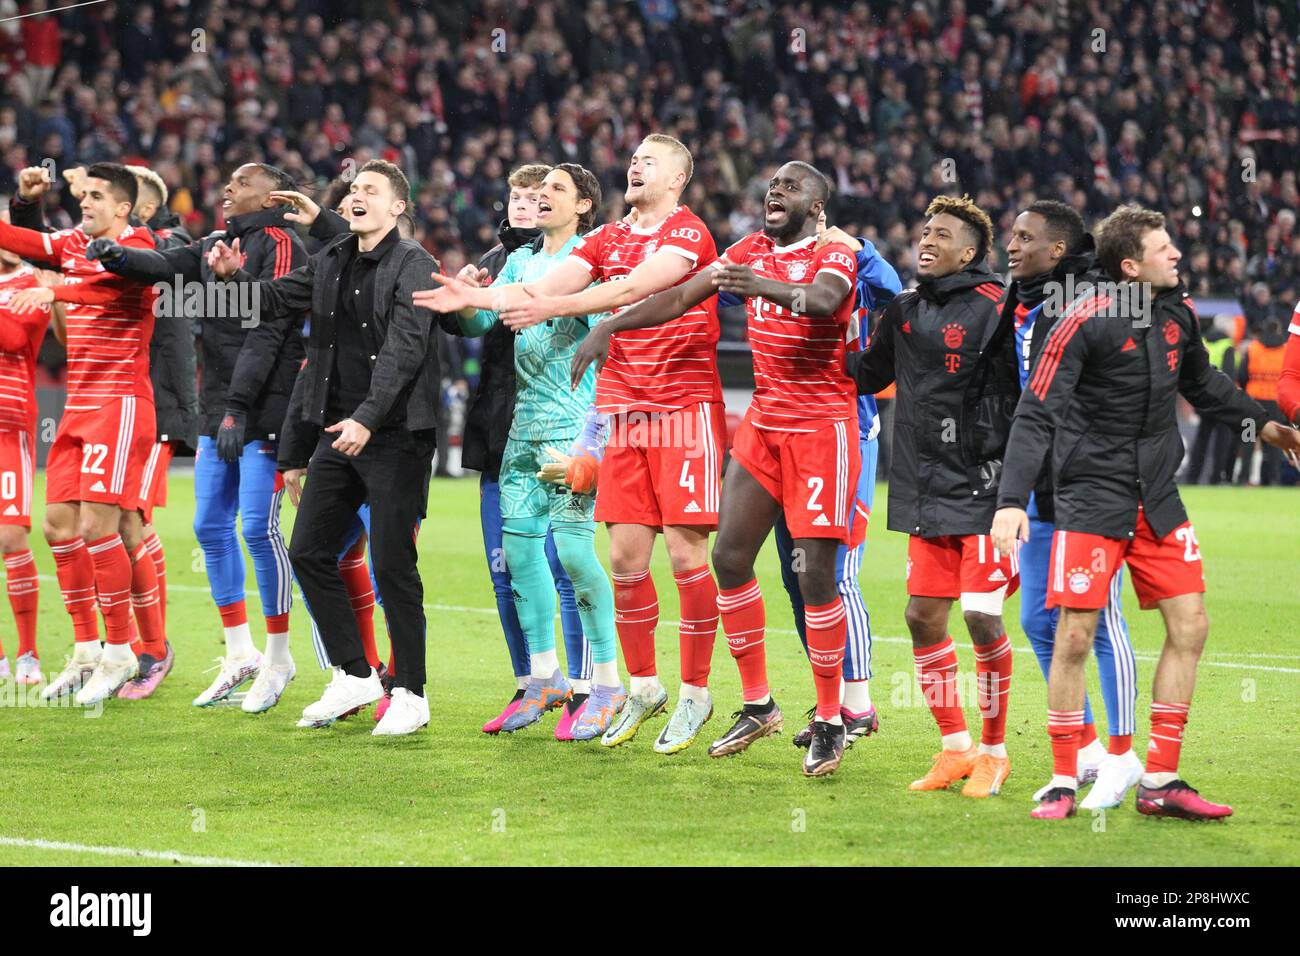 Munich, Germany 08. March 2023: Fc Bayern players celebrate their victory over PSG, 1 Yann SOMMER, 2 Dayot Upamecano, 4 Matthijs de Ligt, 6 Joshua Kimmich, 8 Leon Goretzka, 11 Kingsley Coman, 13 Eric Maxim Choupo-Moting, 19, Alphonso Davies, 25 Thomas Müller, Mueller, 42 Jamal Musiala, 44 Josip Stanisic, 7 Serge Gnabry, 17, Sadio MANÉ, FOOTBALL, UEFA CHAMPIONS LEAGUE, Fc Bayern Muenchen vs PSG, Paris Saint Germain, Round of 16 2nd leg on Wednesday 8. March 2023 in Munich at the Allianz Arena football stadium, result 2:0, (Photo by © Arthur THILL/ATPimages) (THILL Arthur/ATP/SPP) Stock Photo